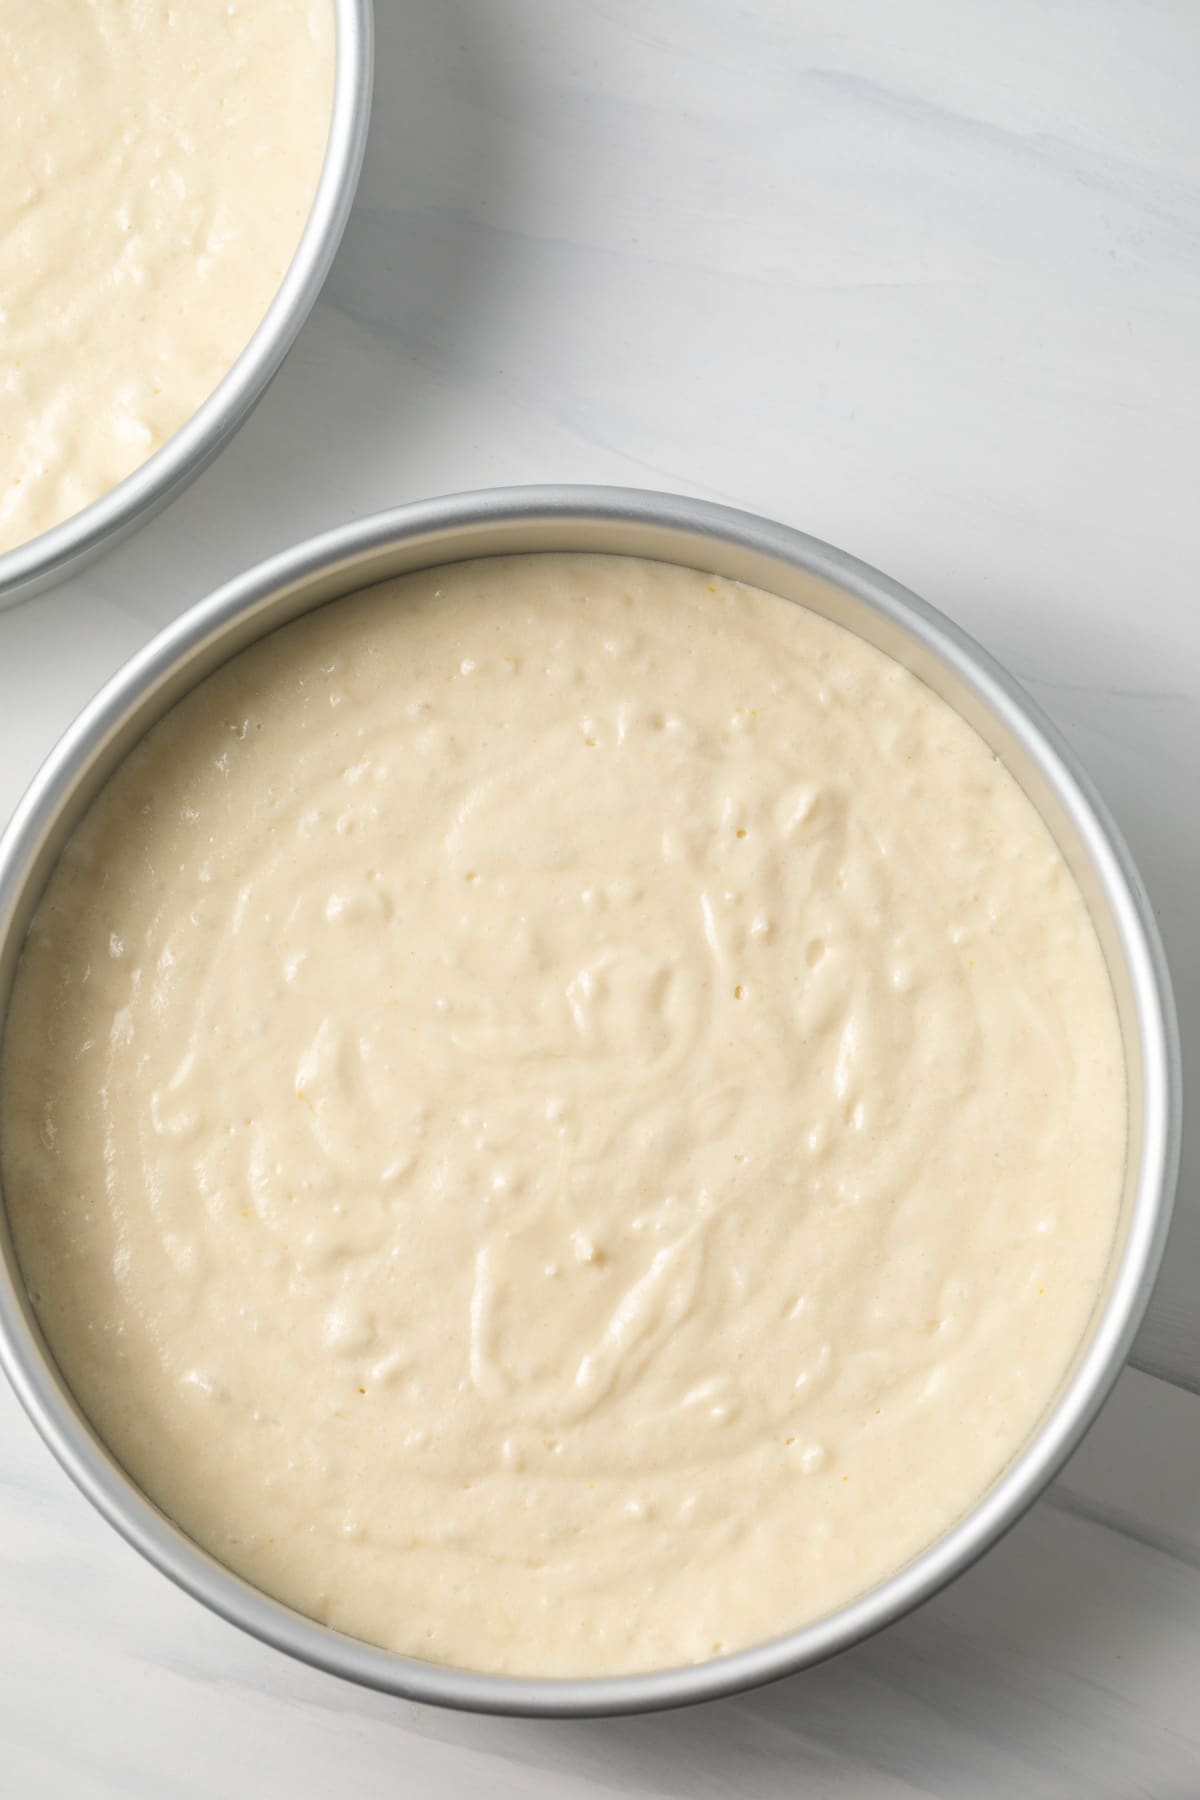 Coconut cake batter in cake round cake pans.